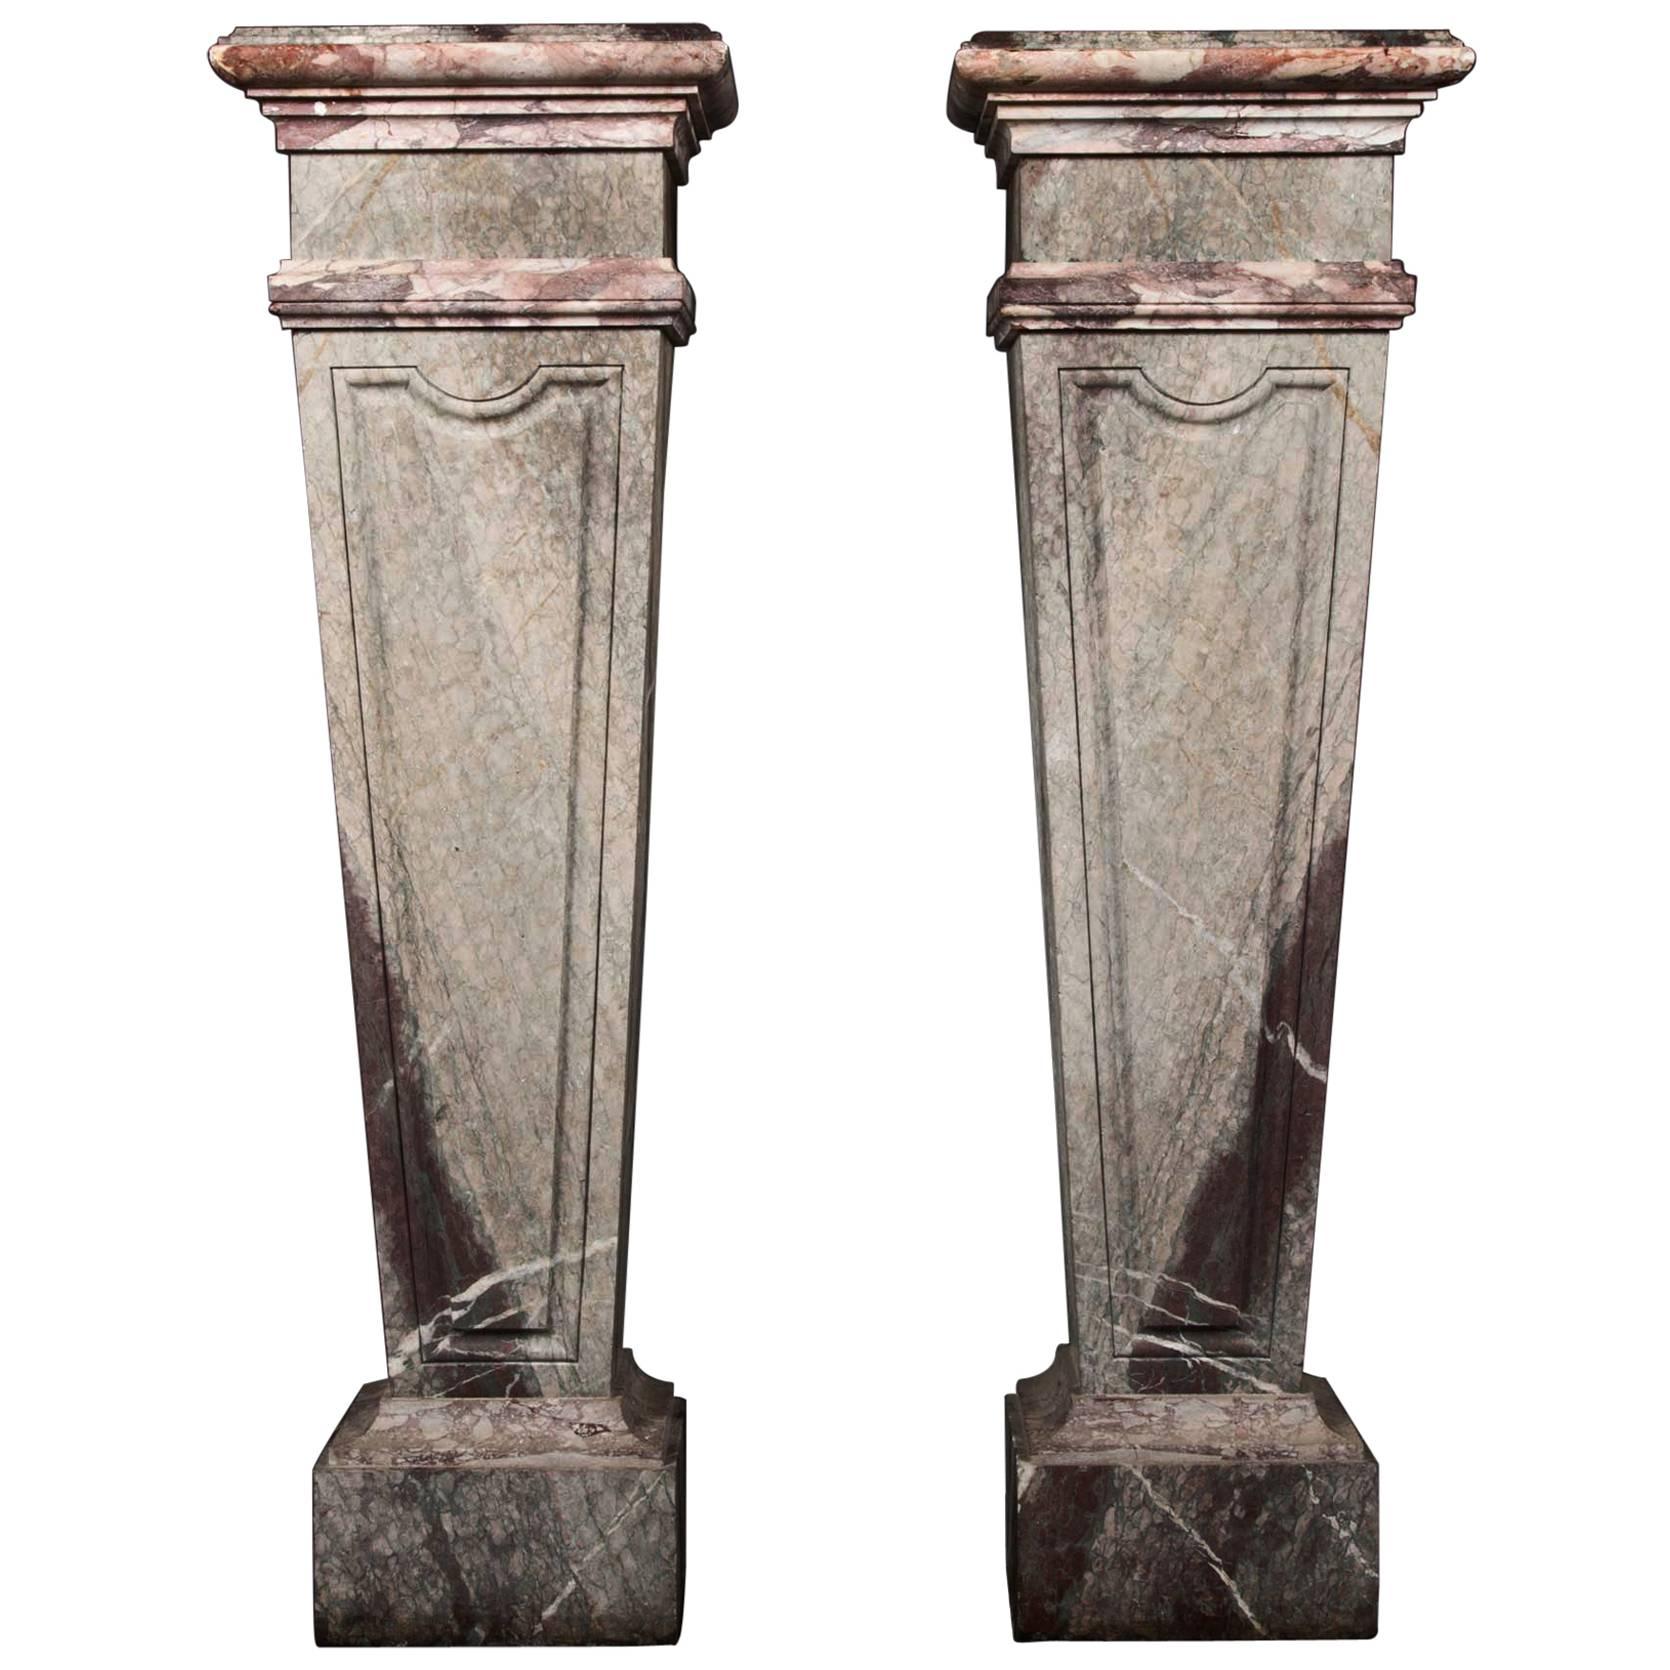 Pair of Marble Column Pedestals with Green and Purple Marble Inlay, 19th Century For Sale